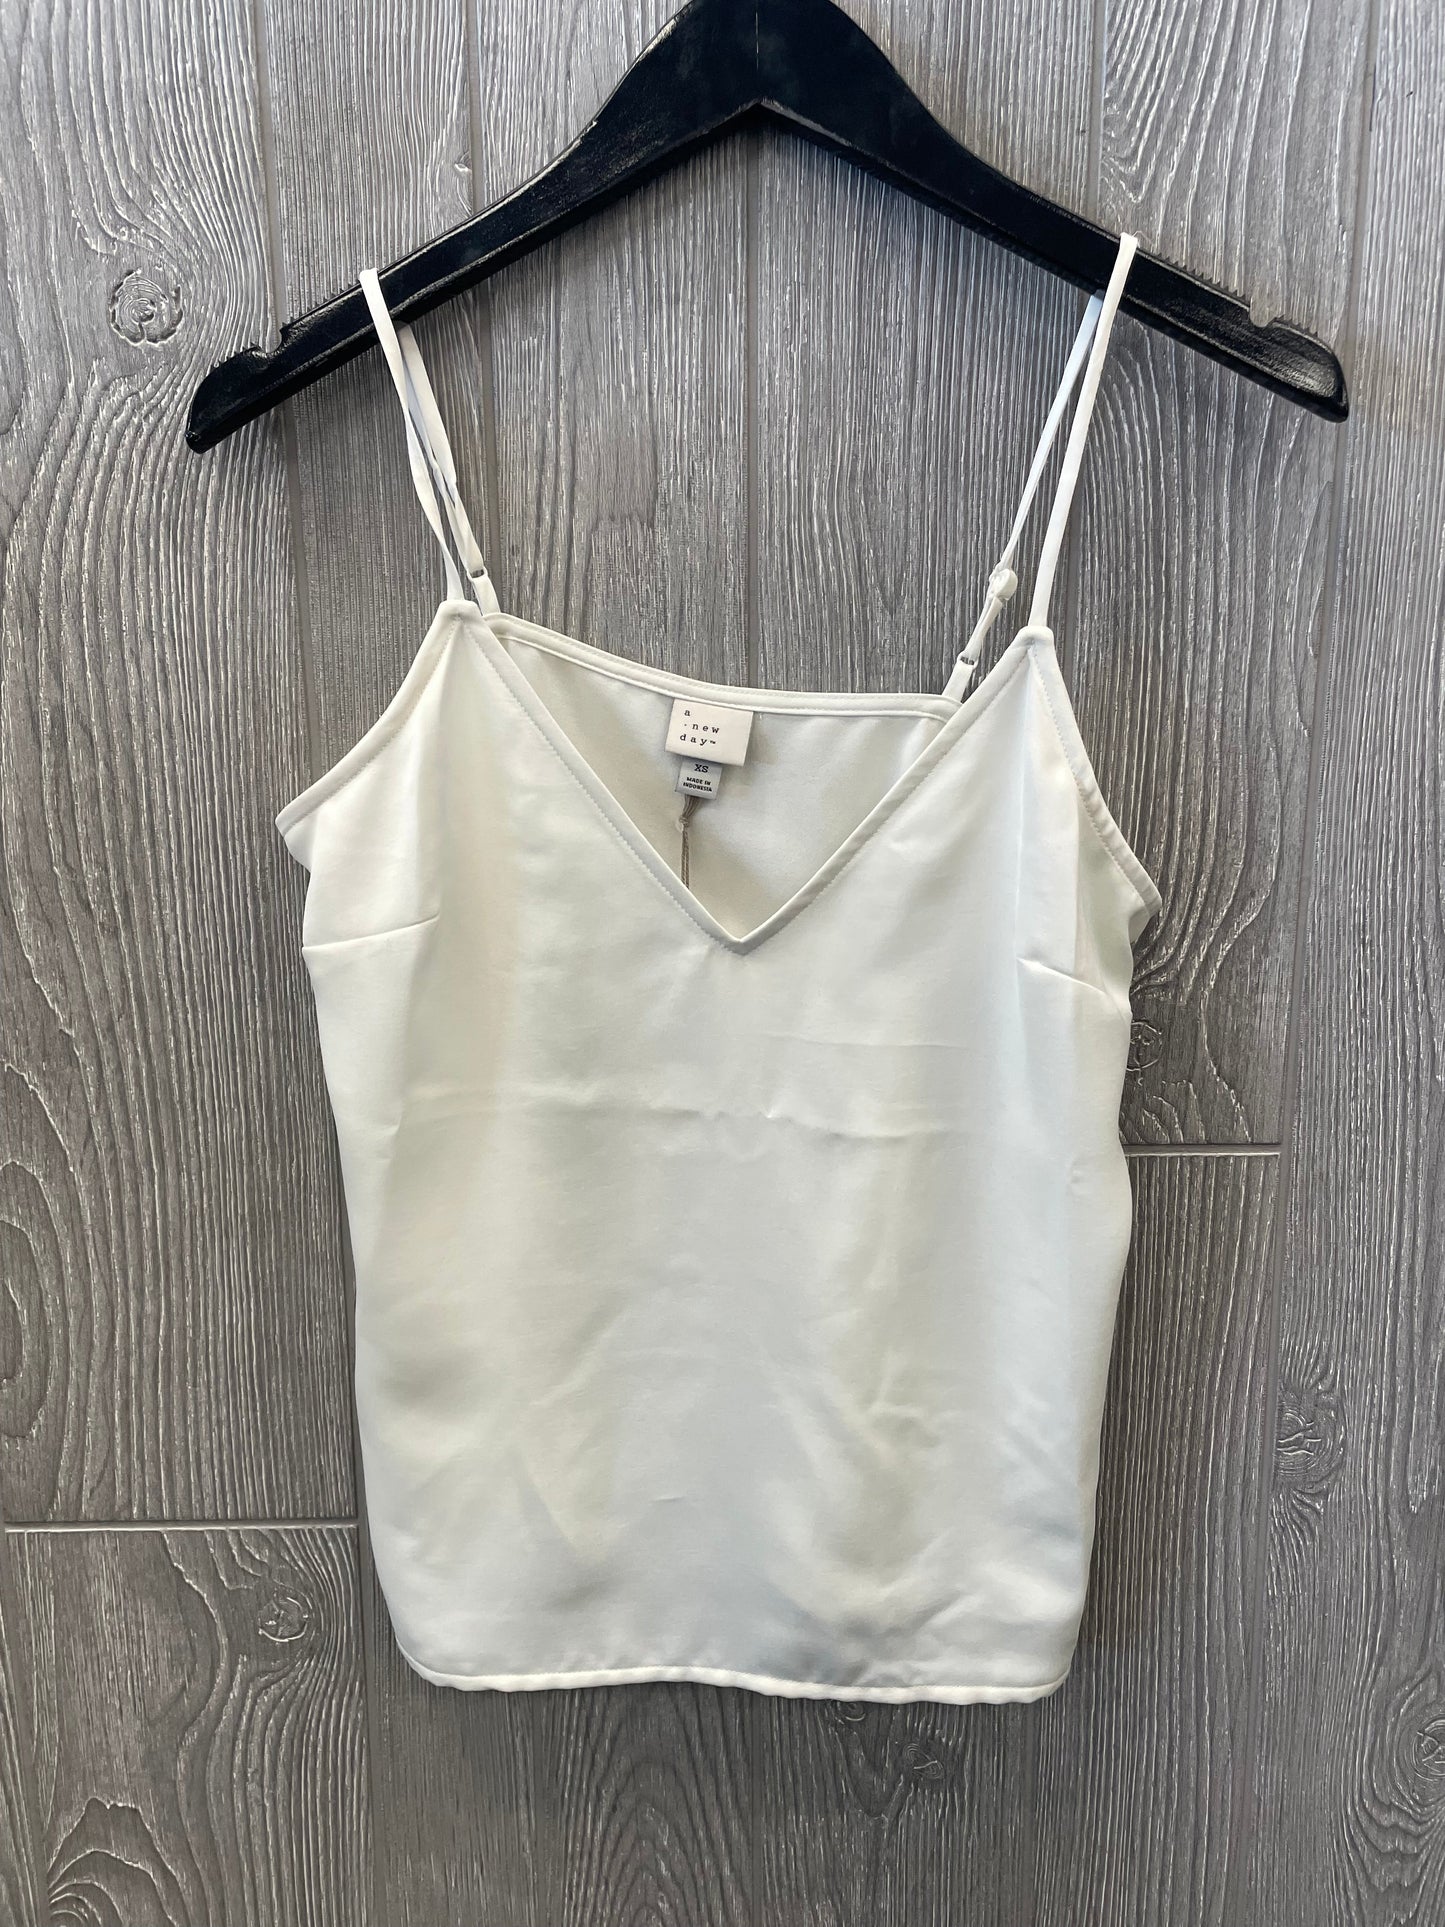 White Top Sleeveless A New Day, Size Xs